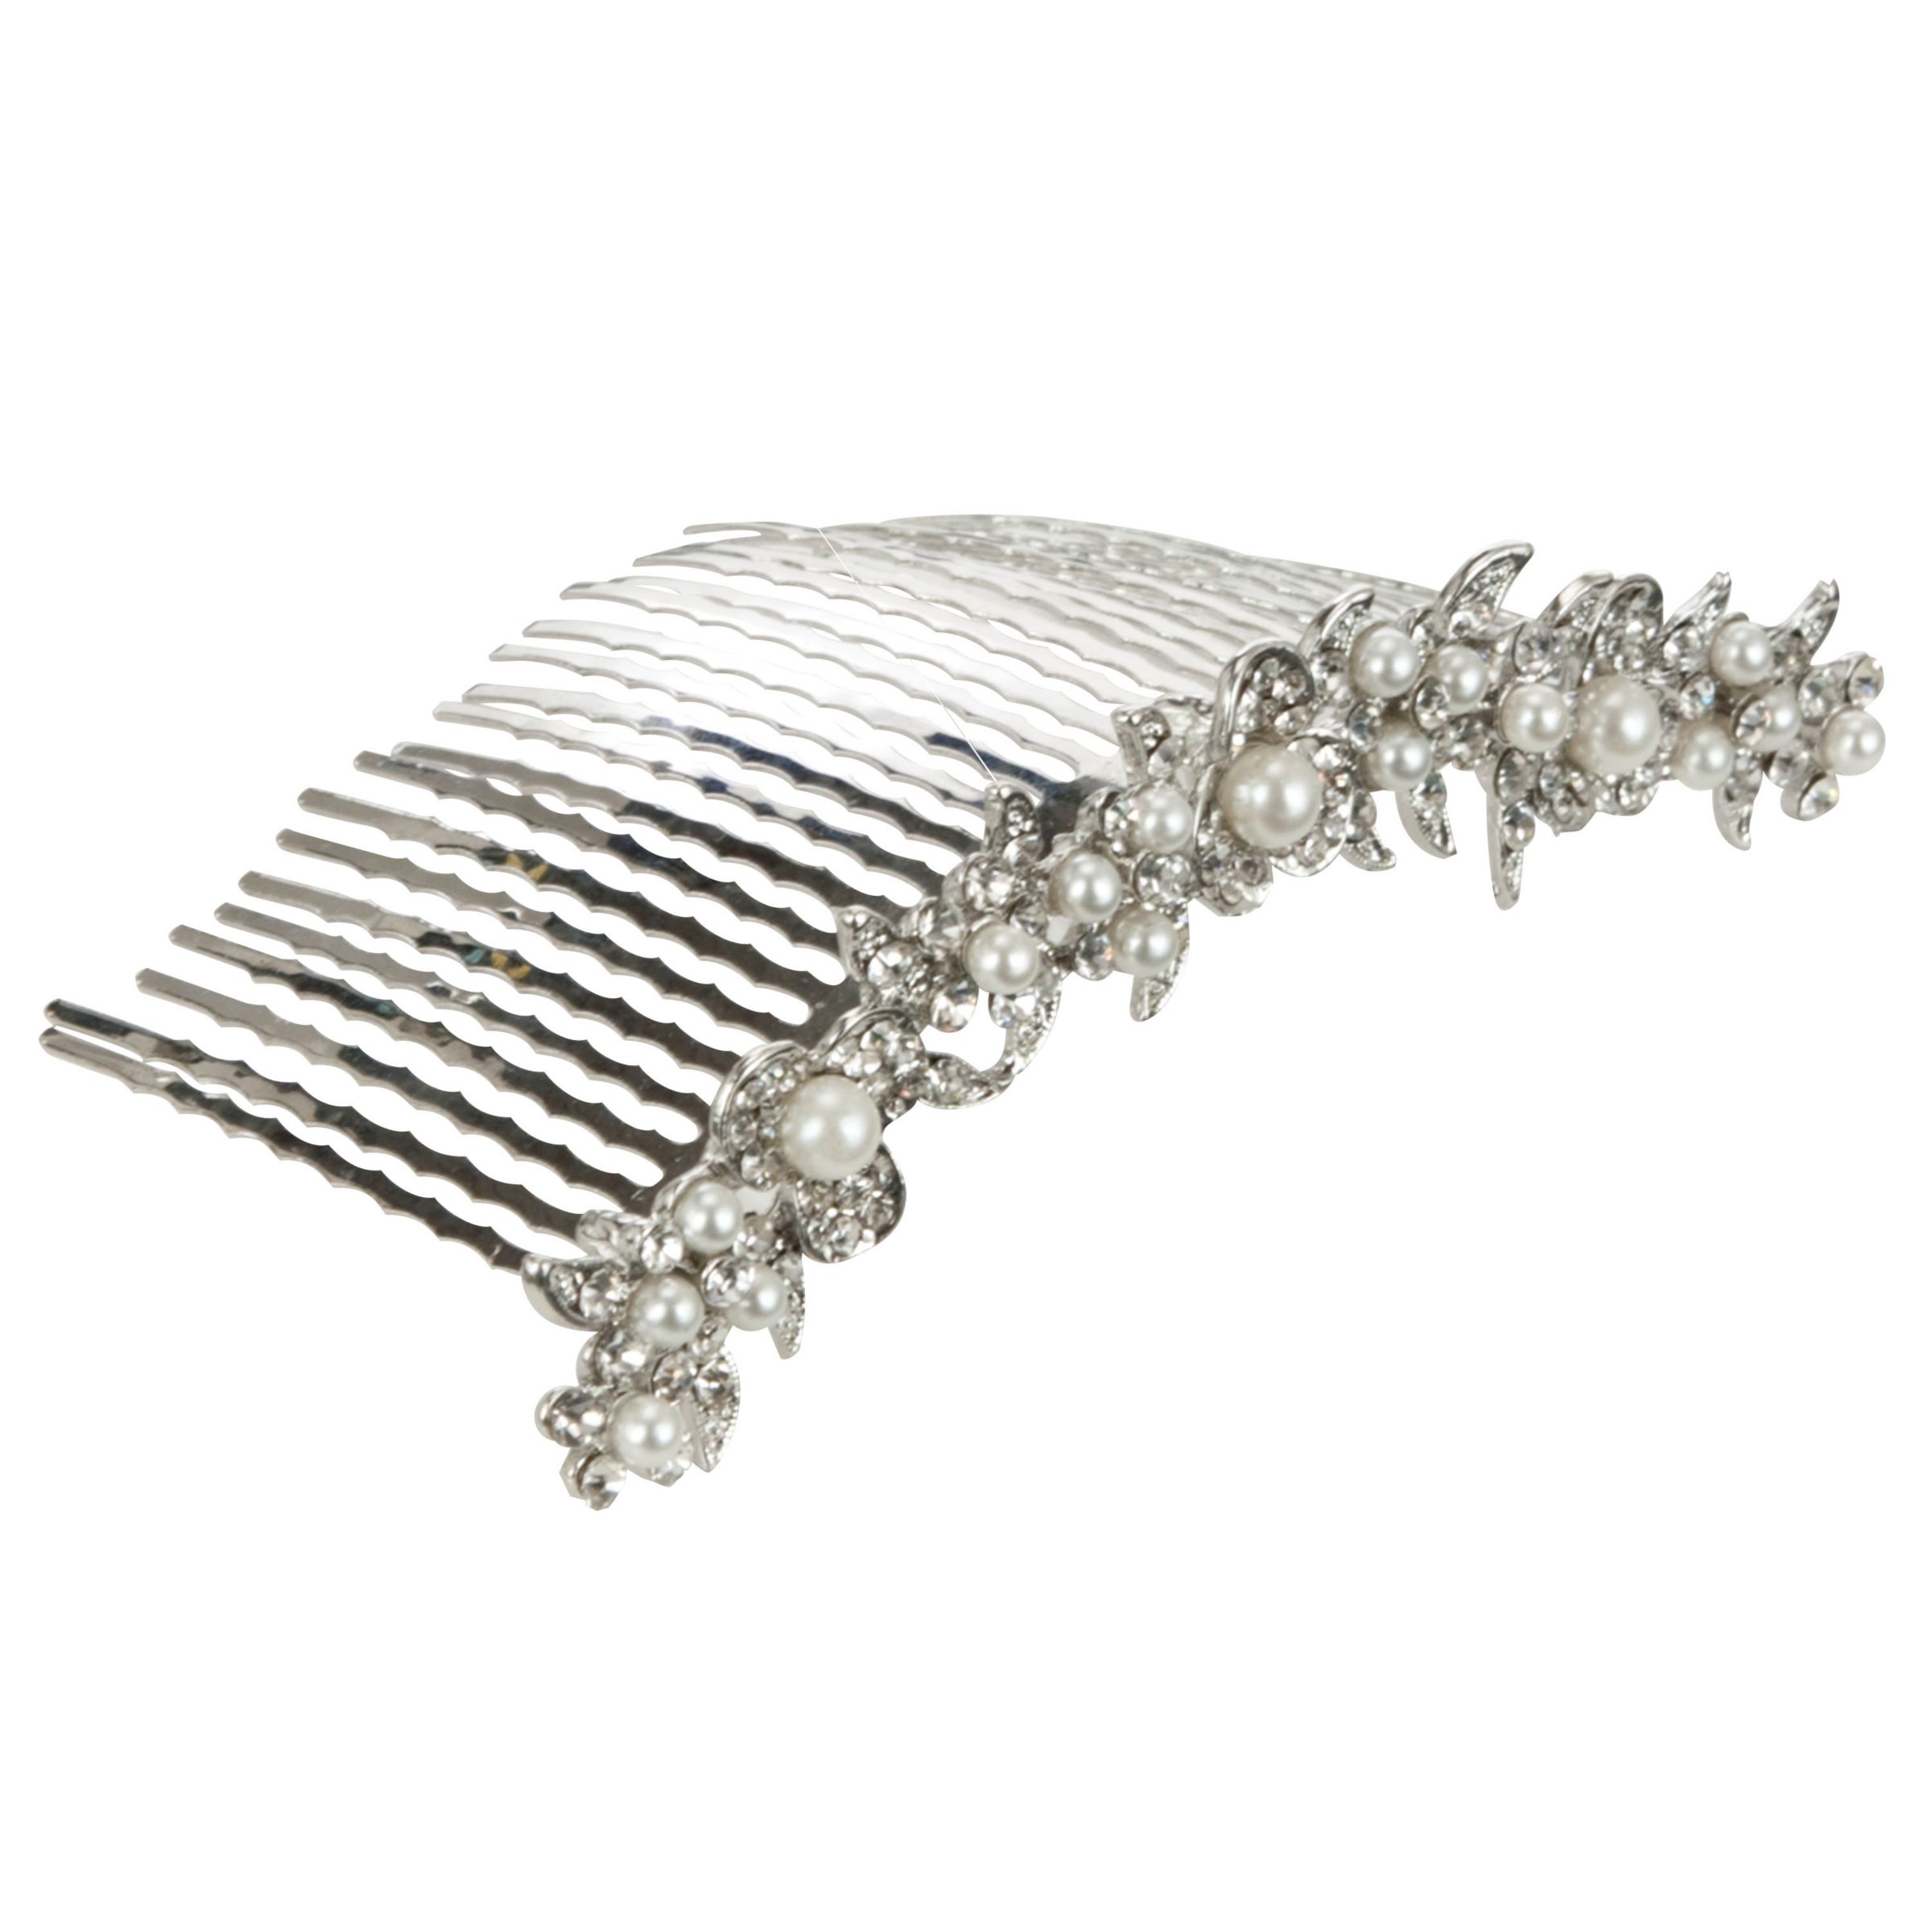  John  Lewis  Partners Row of Pearls  Hair Comb Silver 